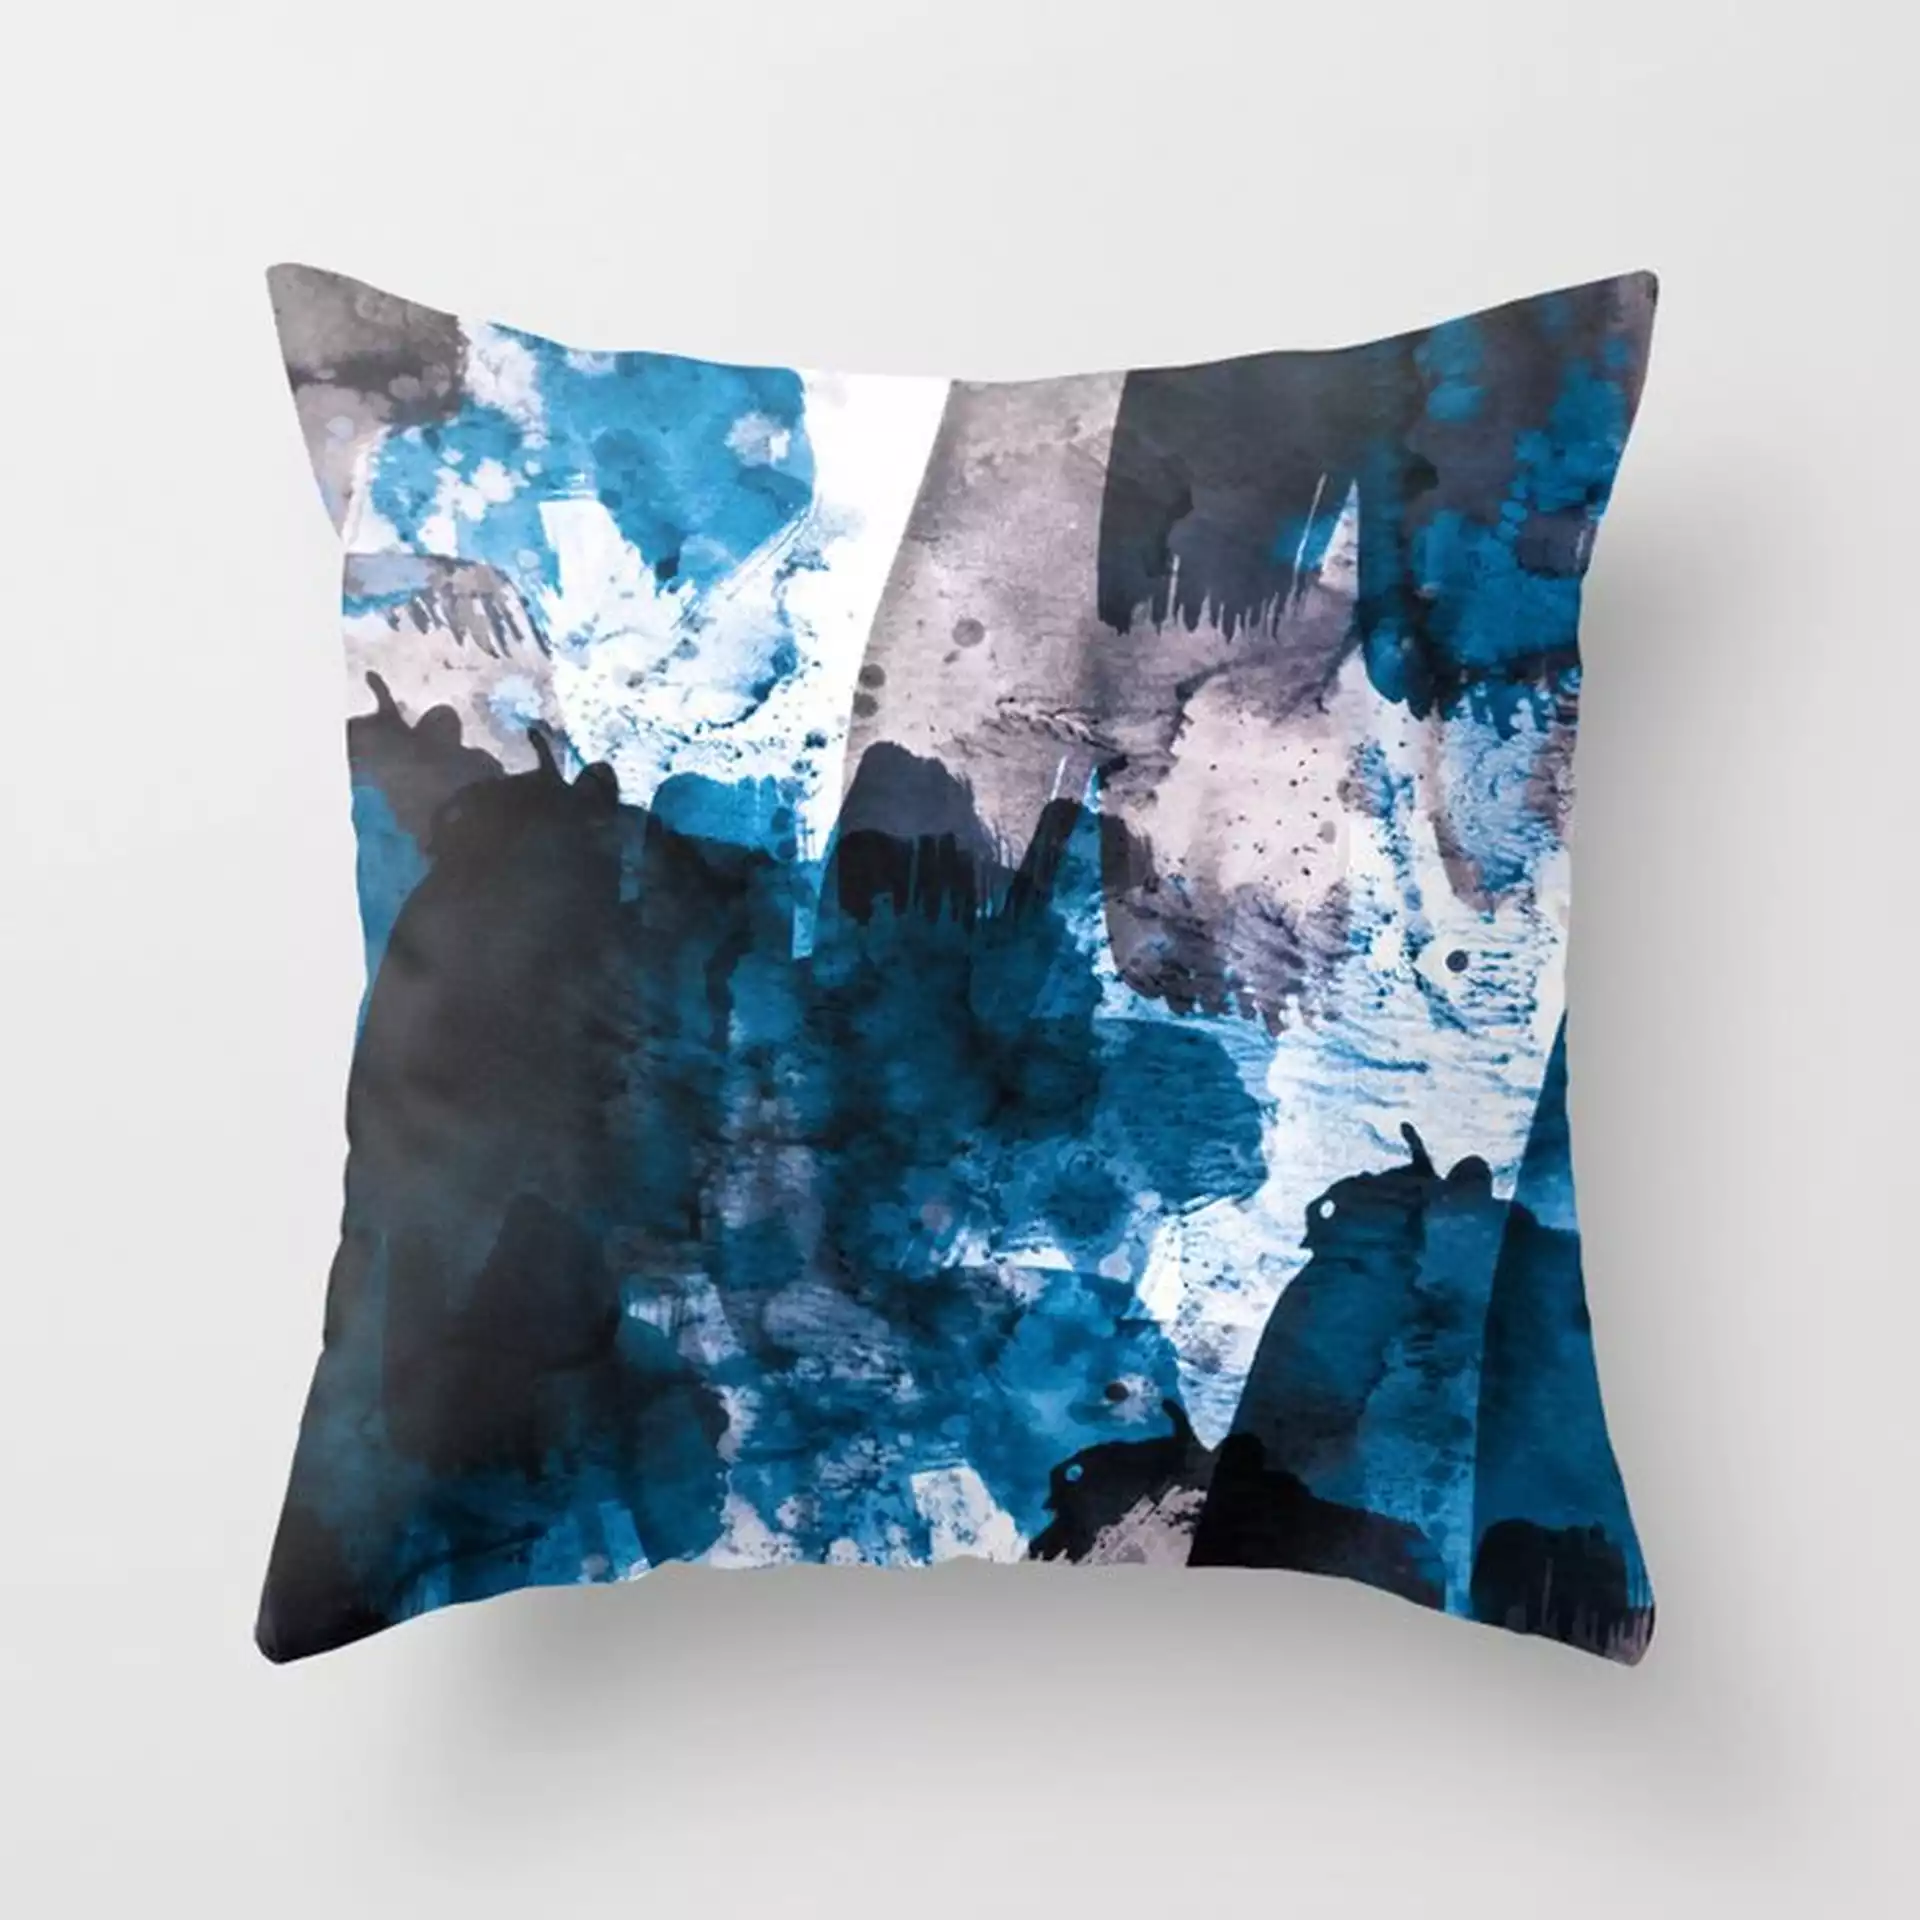 Blue & Mauve Couch Throw Pillow by Iris Lehnhardt - Cover (20" x 20") with pillow insert - Outdoor Pillow